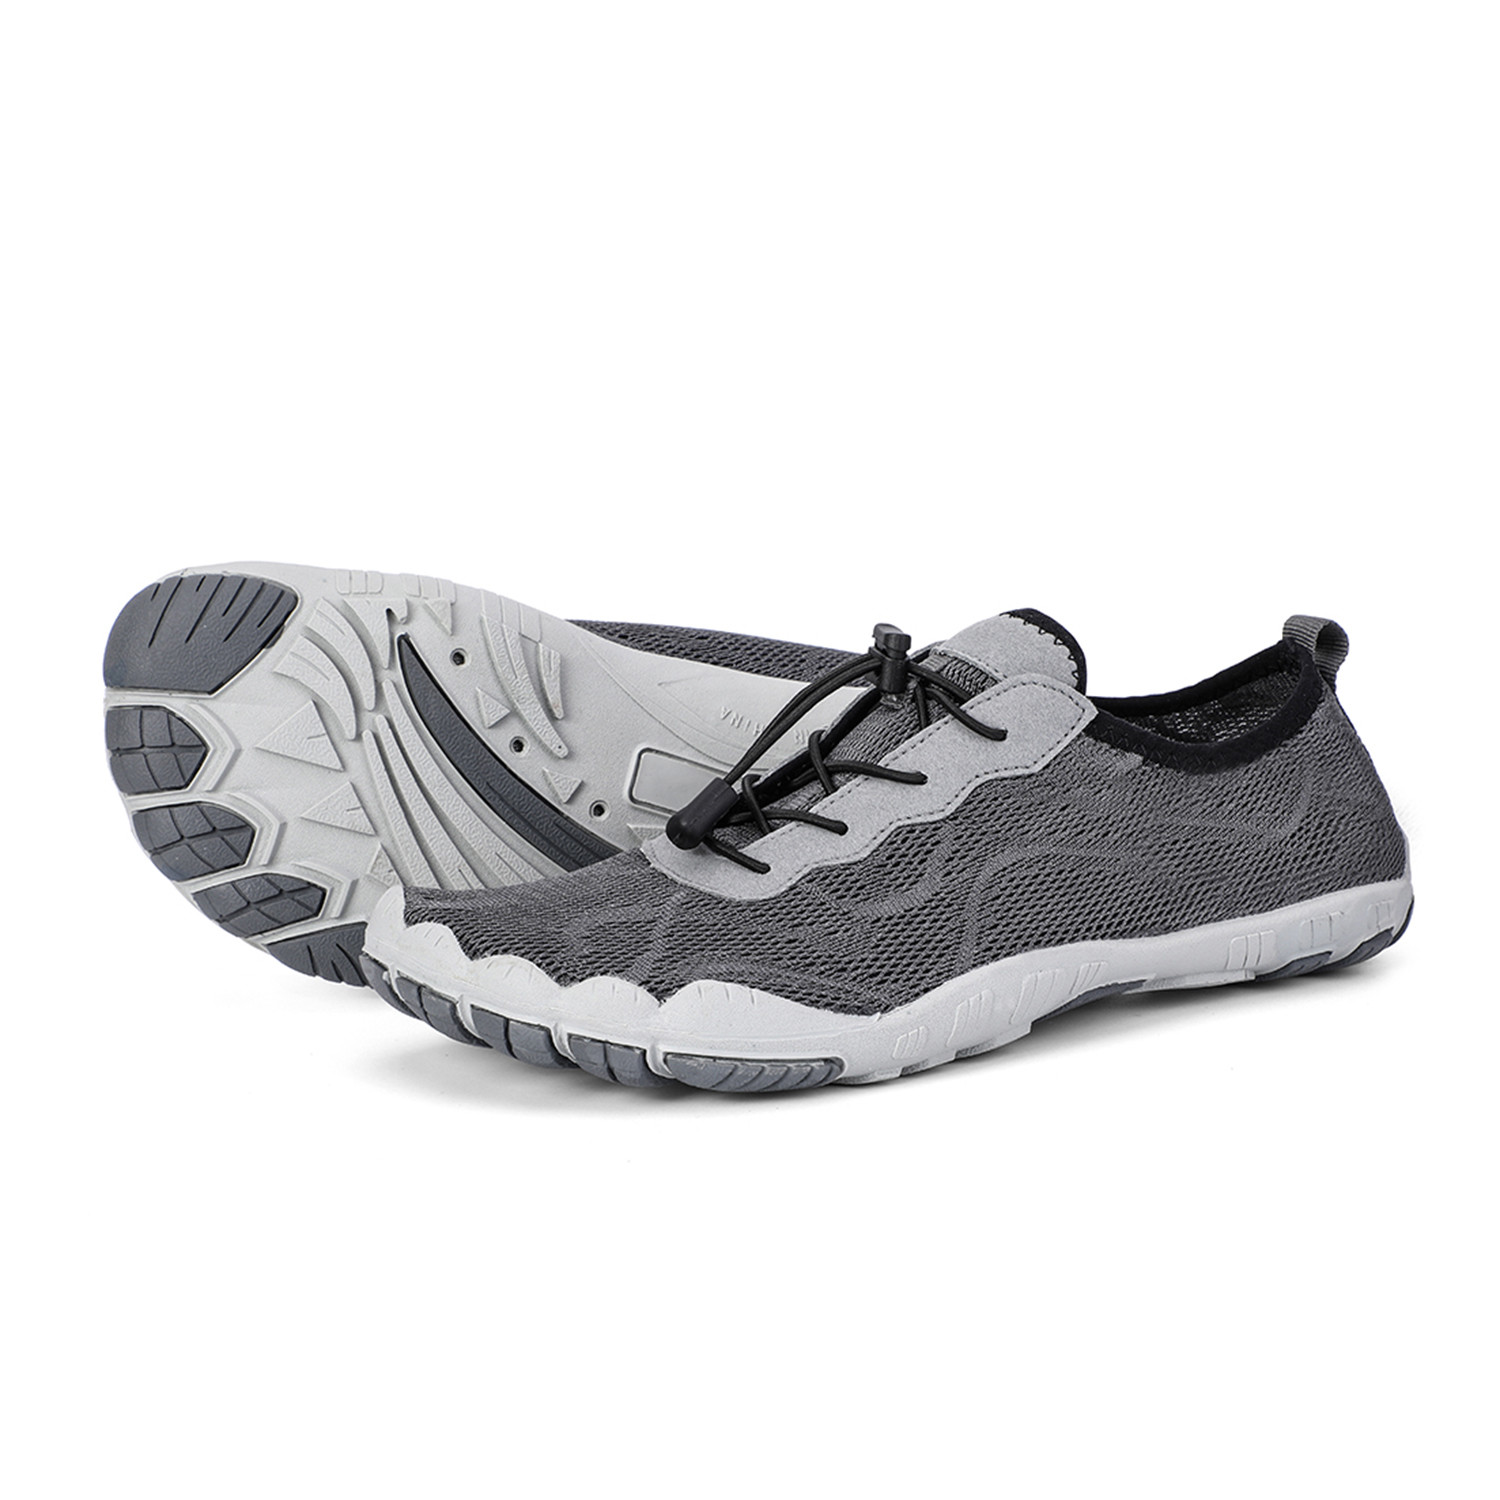 Men's Barefoot Mesh Water Shoes // Gray (US: 8) - Shoe Clearance ...